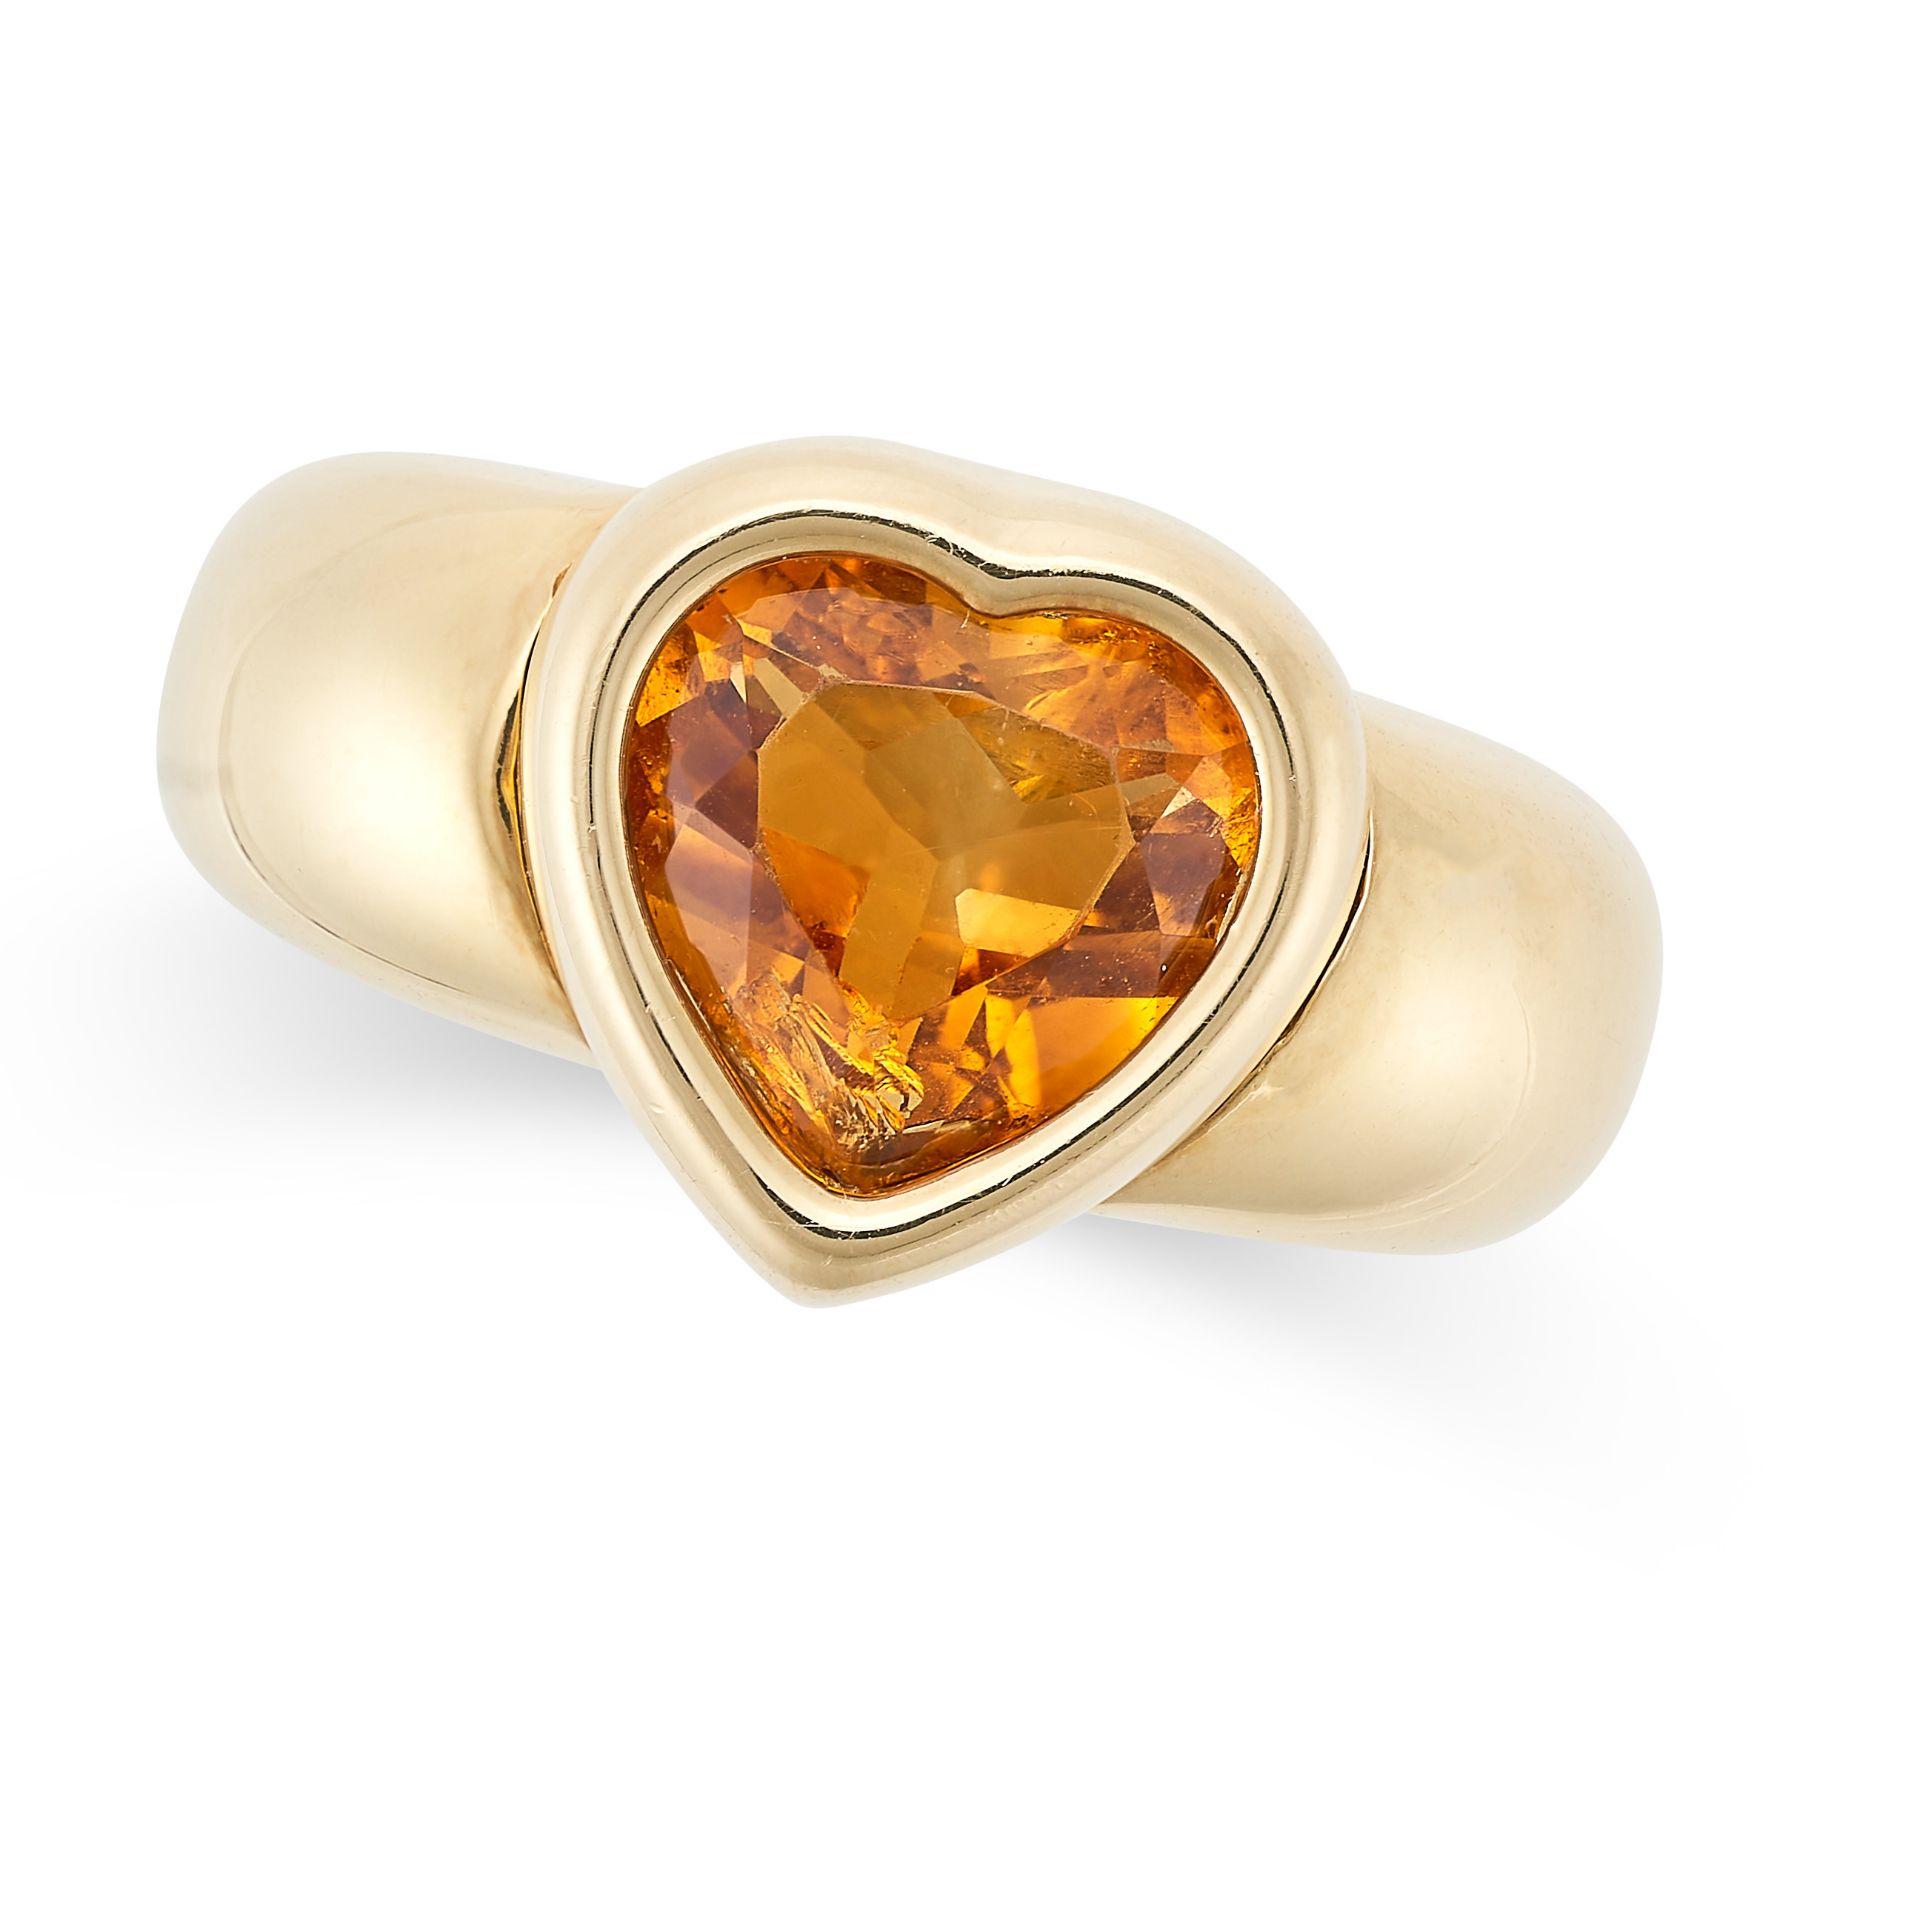 PIAGET, A CITRINE HEART RING in 18ct yellow gold, set with a heart shaped citrine, signed Piaget and